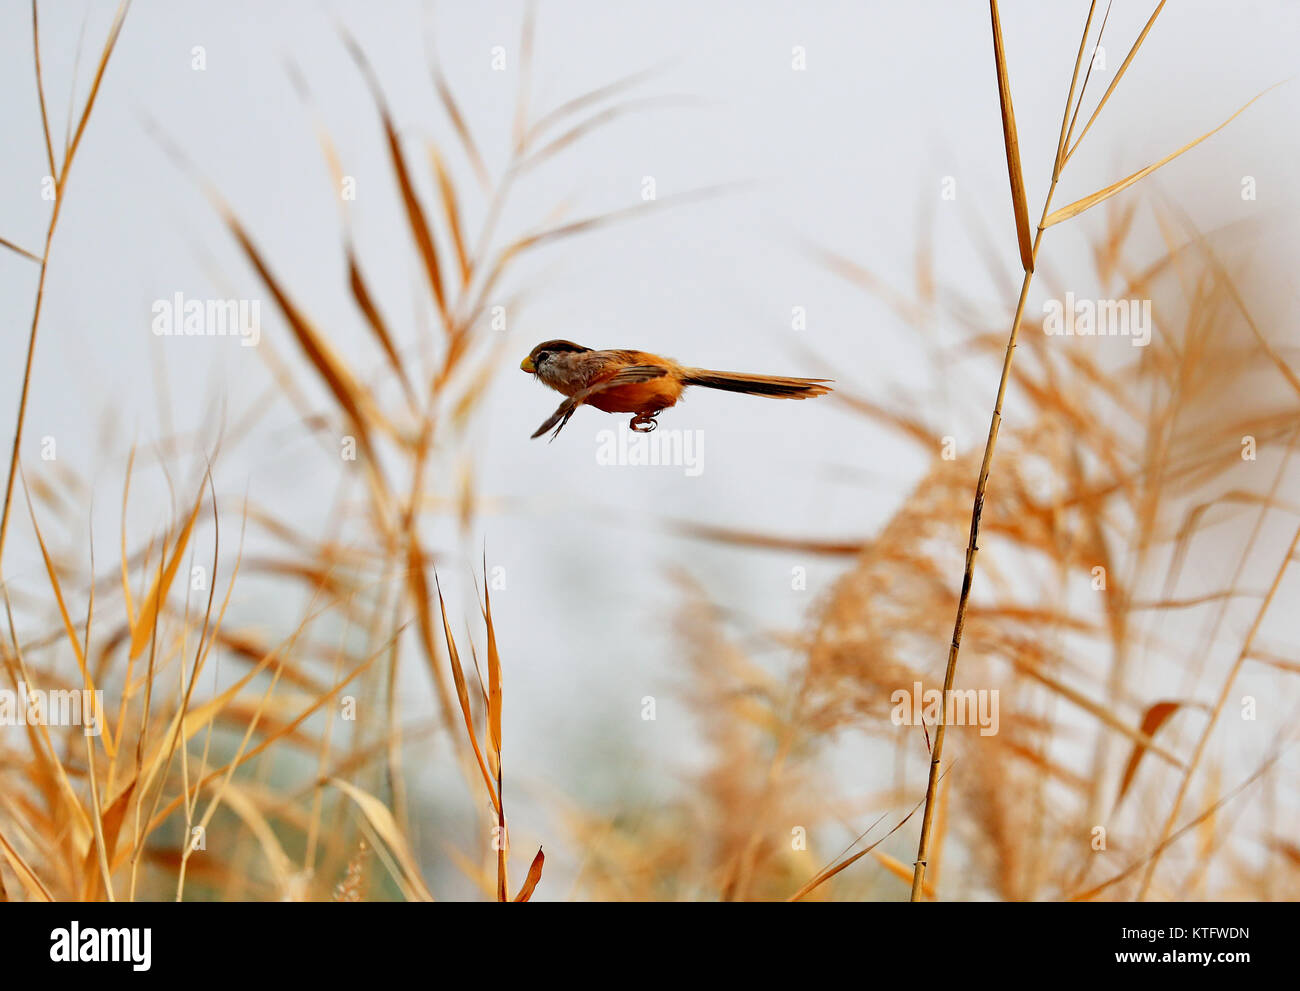 Beijing, China. 6th Nov, 2017. A reed parrotbill flies in reeds in Wanping Lake of Beijing, capital of China, Nov. 6, 2017. Photos here taken in 2017 by Xinhua contract photographers present a harmony between animals and nature. Credit: Liu Xianguo/Xinhua/Alamy Live News Stock Photo